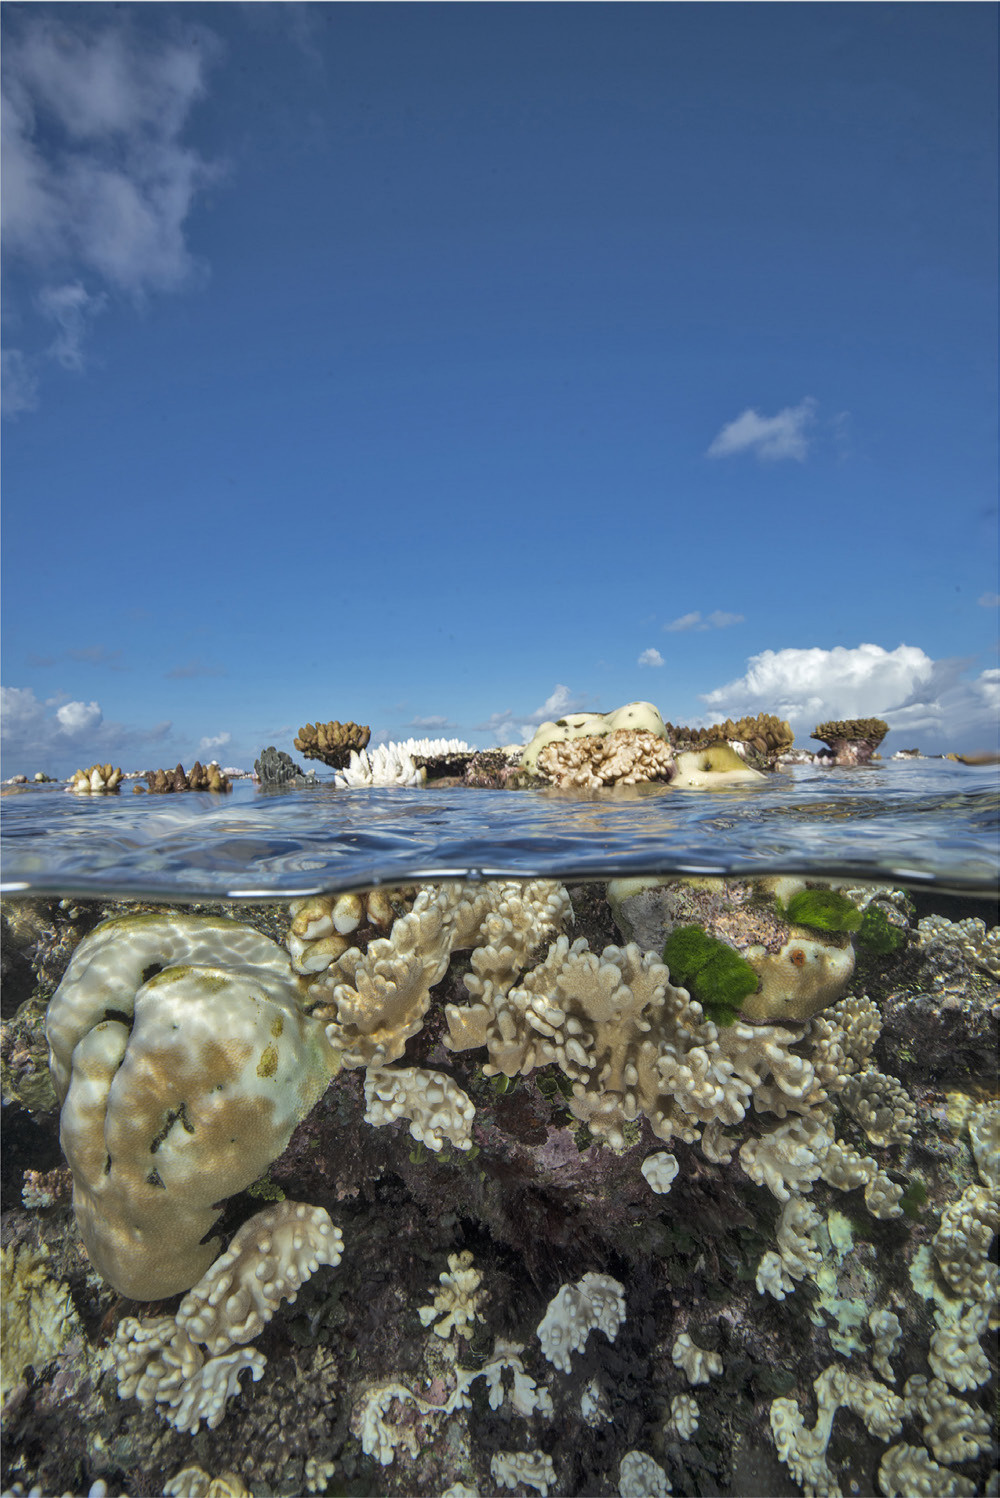 Fig. 7 
            Image of a bleached coral reef in the Great Barrier Reef, courtesy of Jayne Jenkins, reproduced with permission.
          